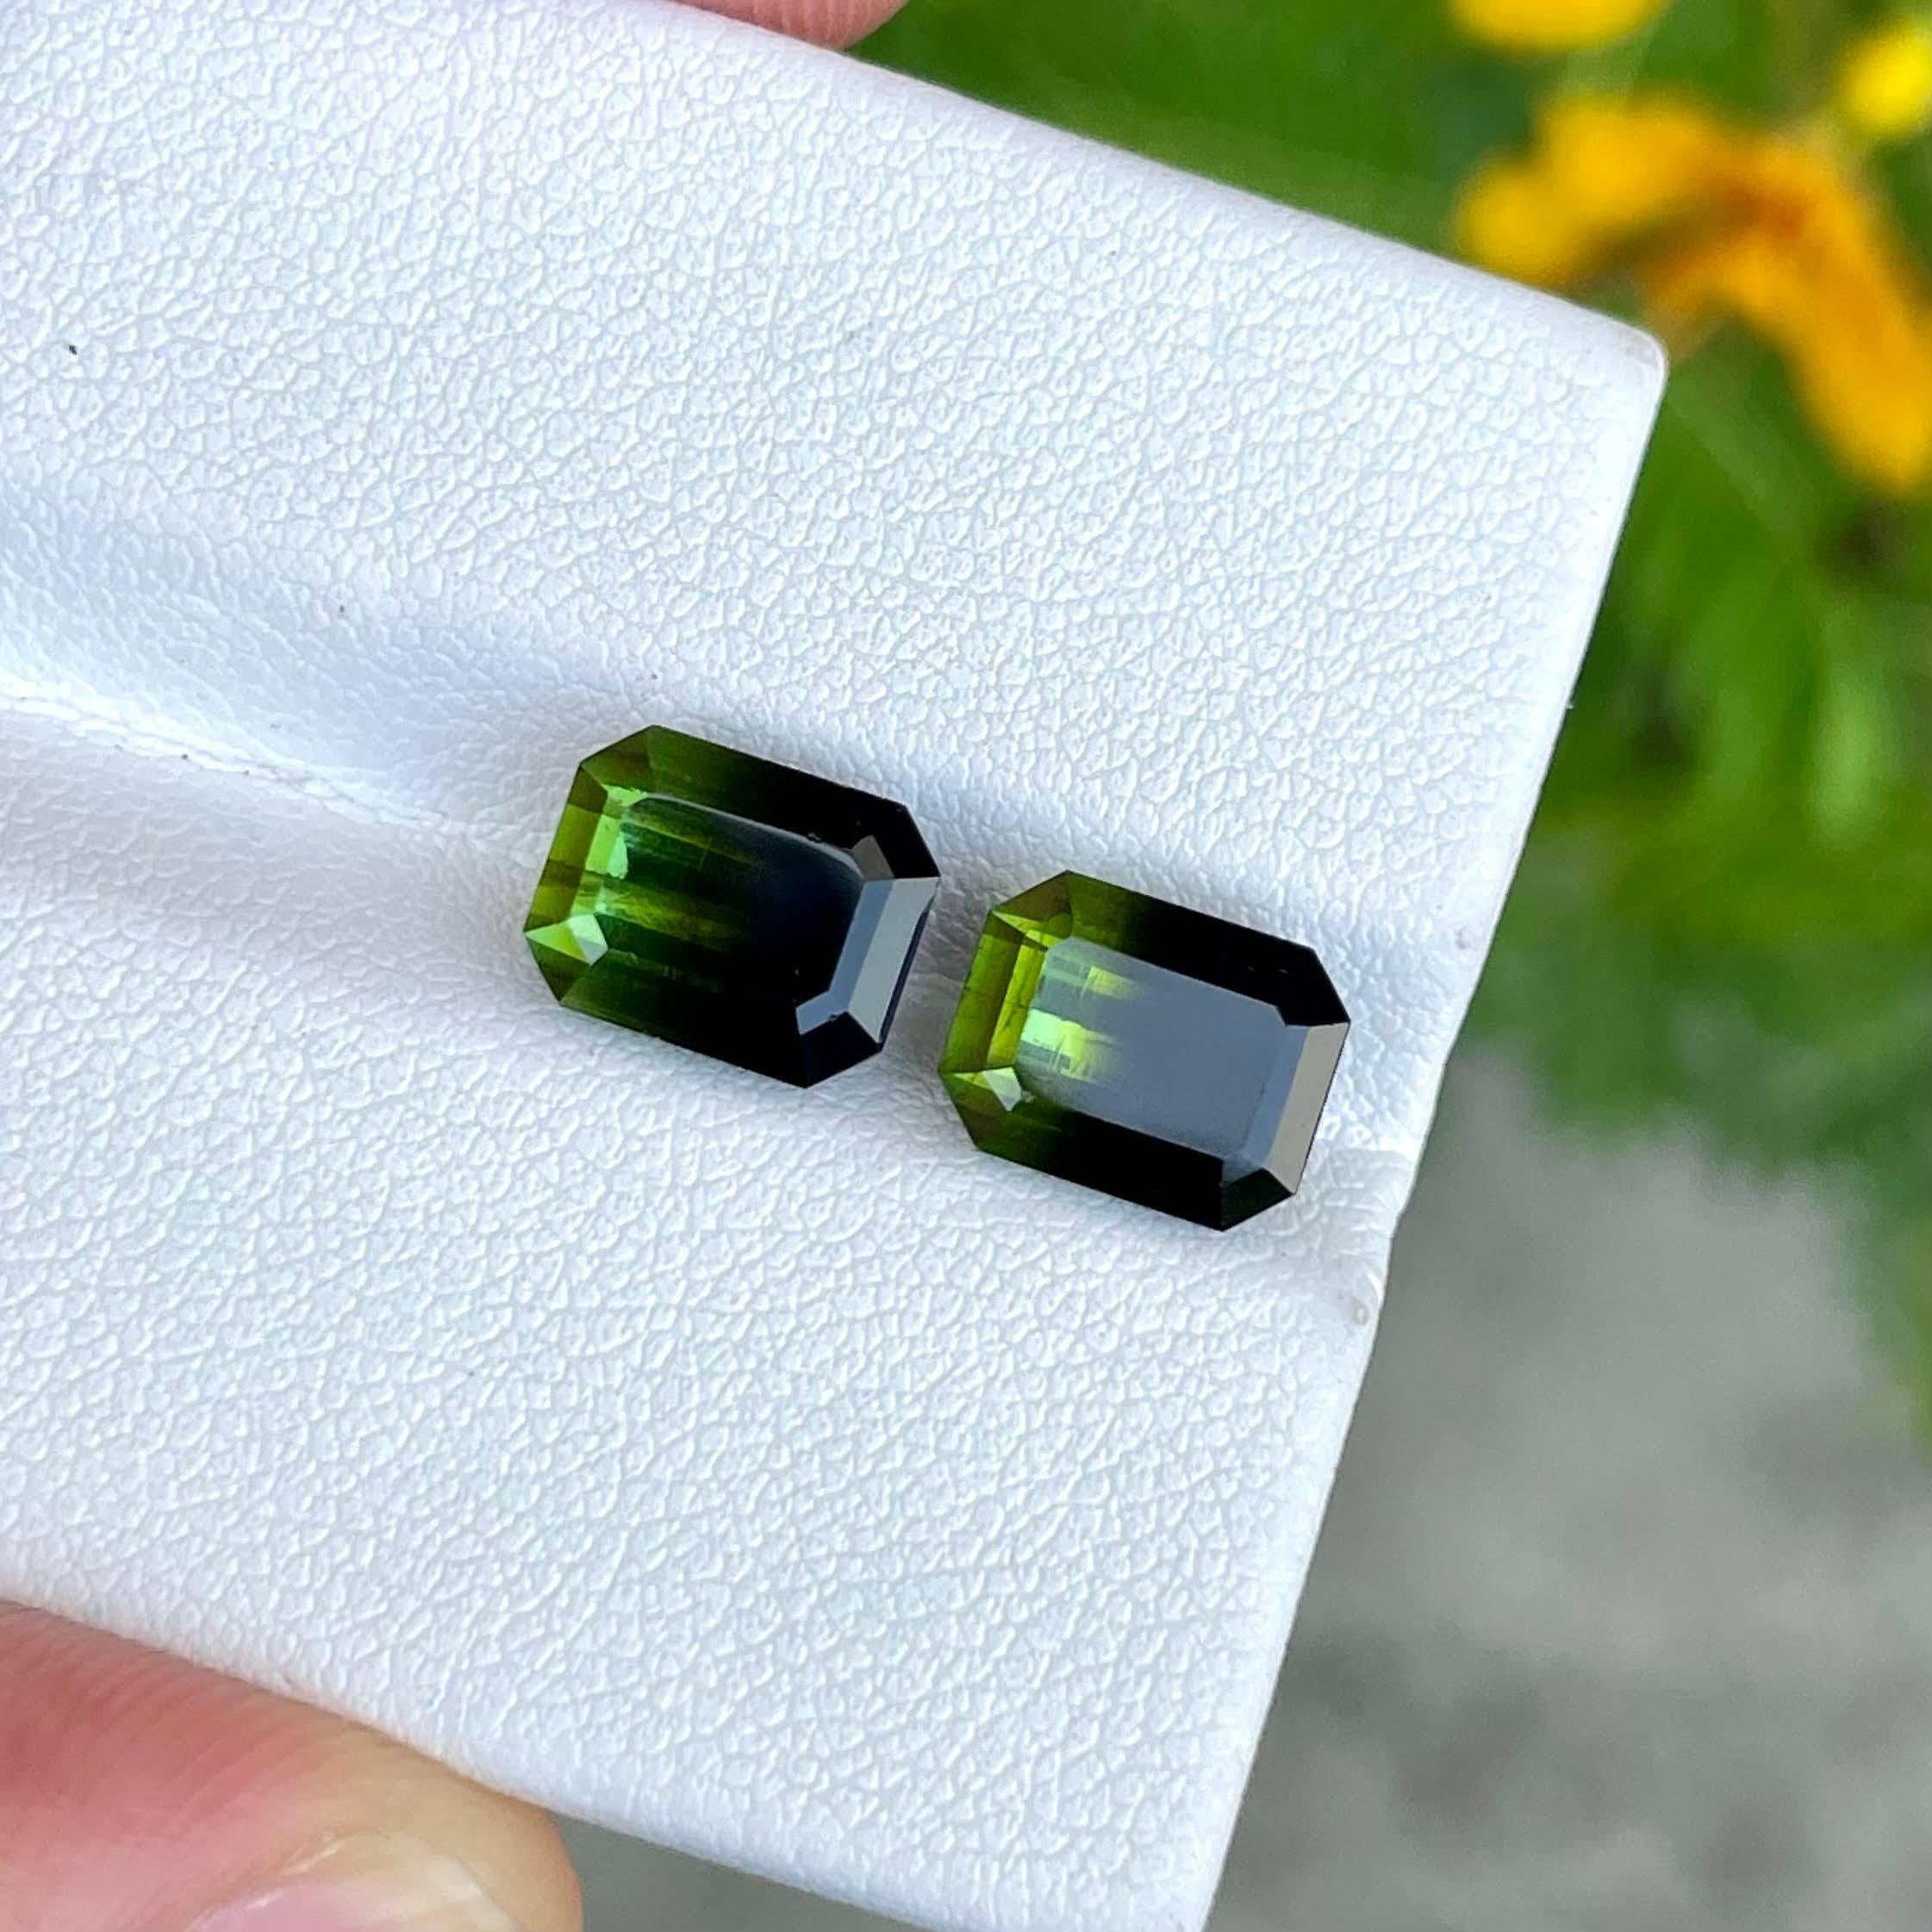 7.13 carats
Dim 8.9x7.05x6.35 mm
8.9x7.05x6.2 mm
Treatment None
Clarity Clean
Origin Pakistan
Shape Octagon
Cut Emerald




The Bi color Stak Nala Tourmaline Pair is an exquisite gemstone, boasting a remarkable weight of 7.13 carats. Mined from the